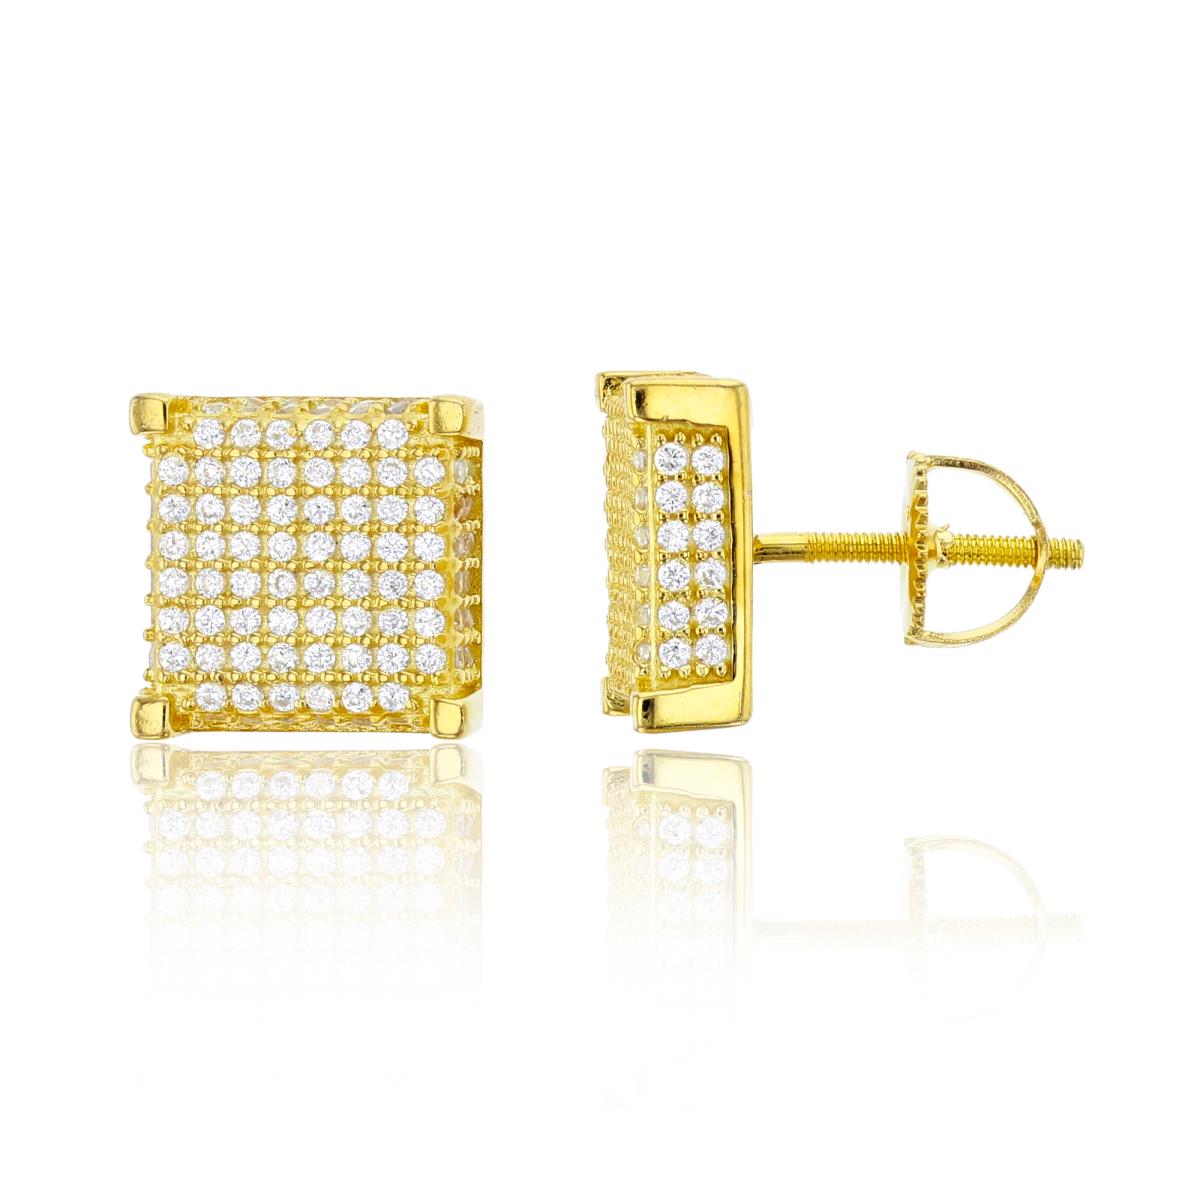 Sterling Silver Yellow Micropave 8x8 Square Screw-Back Mens Stud Earring